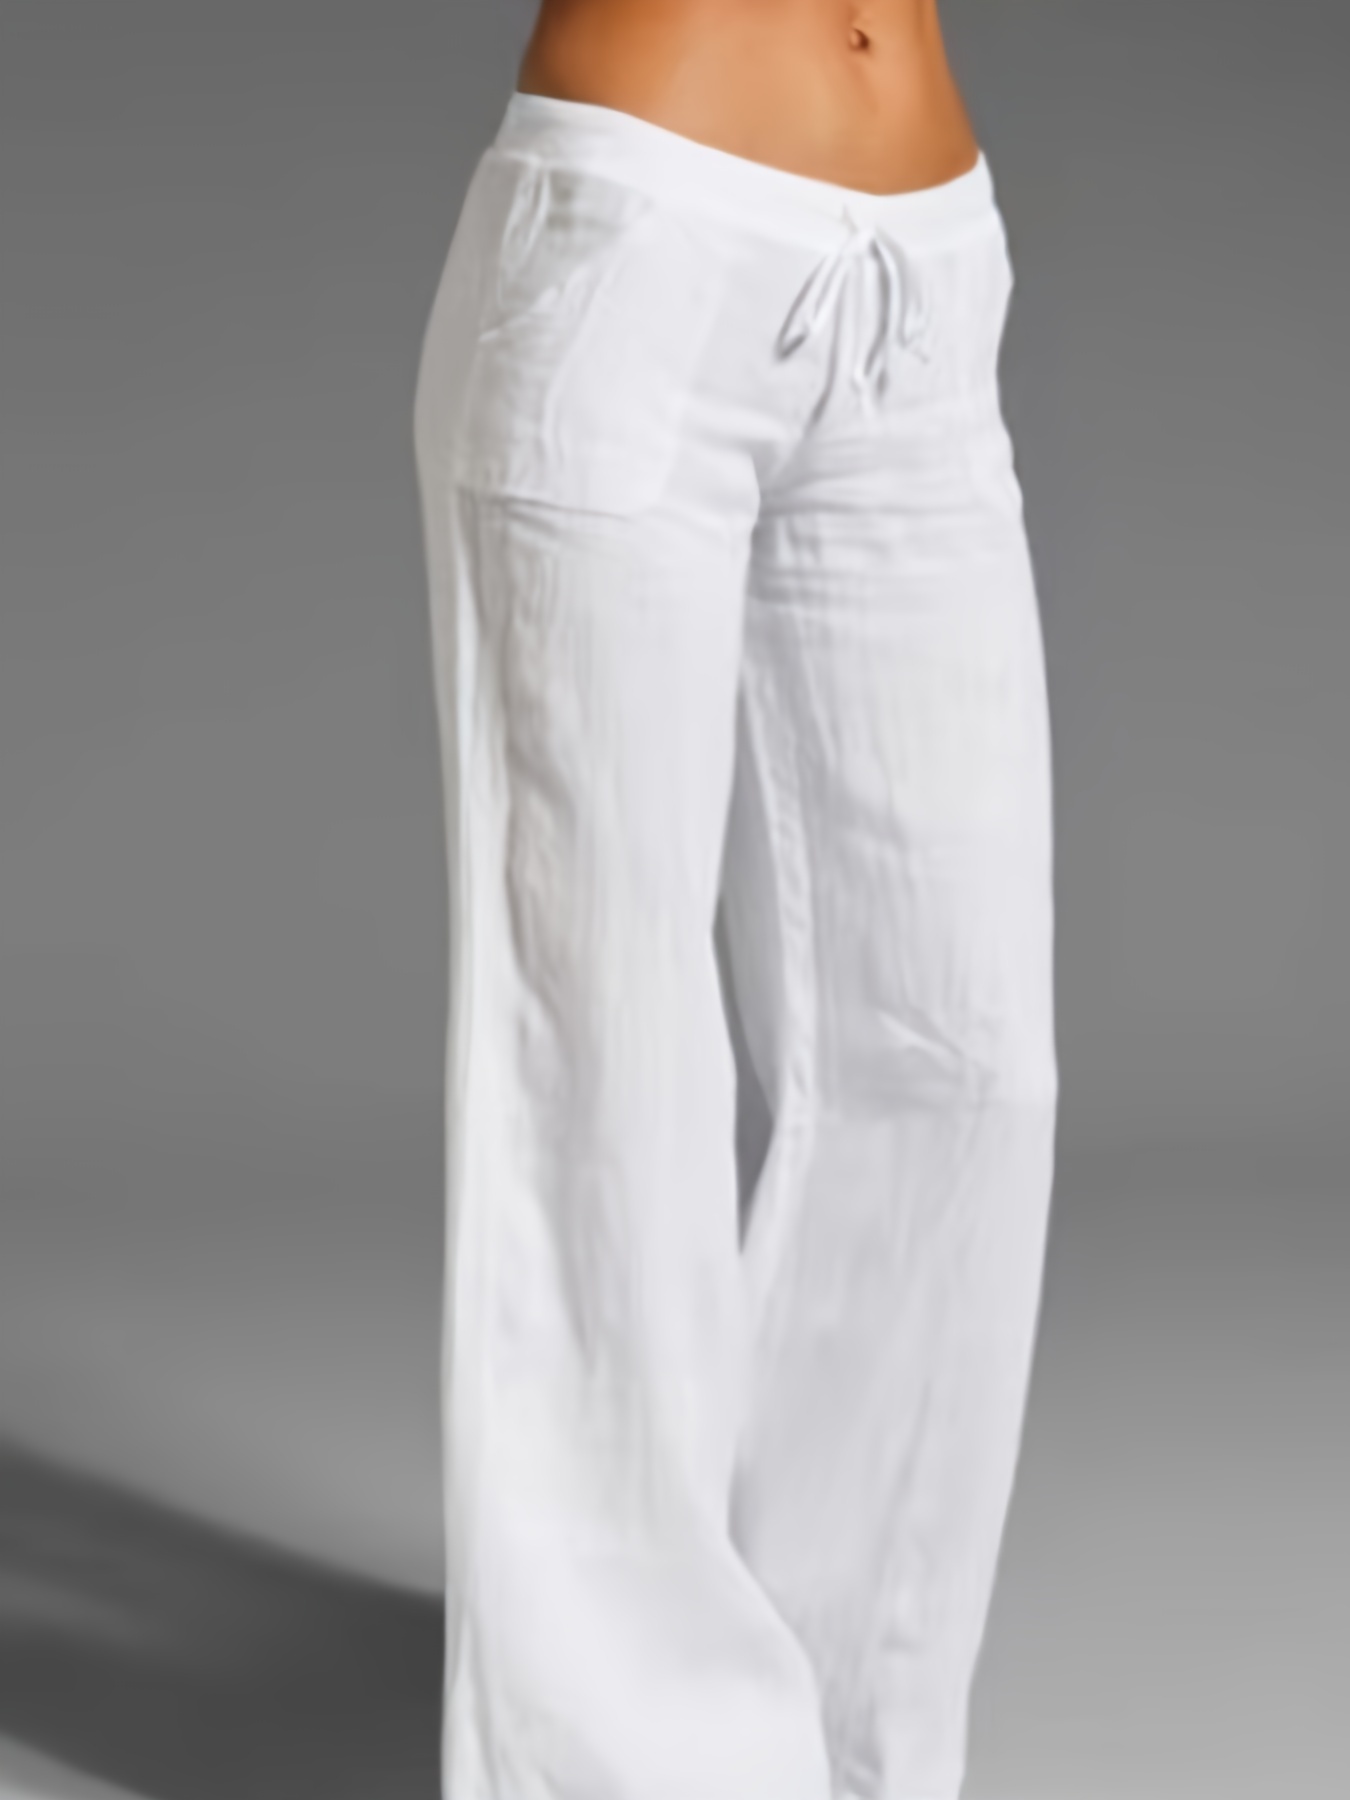 High Waist Cotton Linen Joggers For Women White Spring/Summer Pants With  Elastic Fit, Natural Cotton Drawstring Bag Closure, And Loose Fit Available  In 3XL And Big Sizes Ropa Mujer 201118 From Dou04